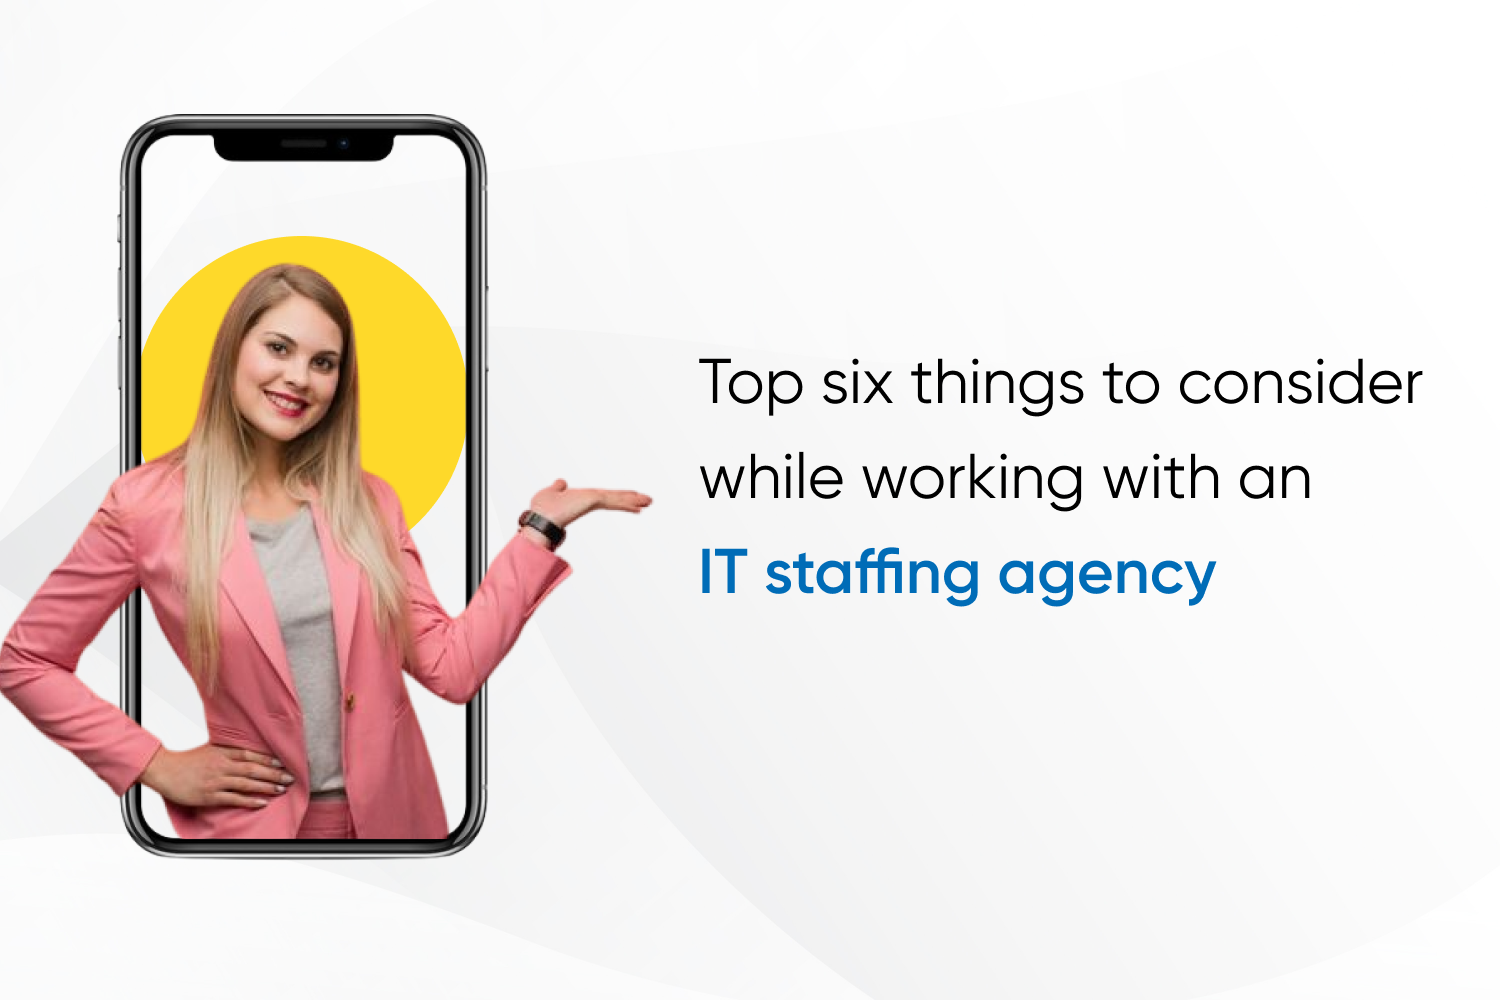 Top six things to consider while working with an IT staffing agency